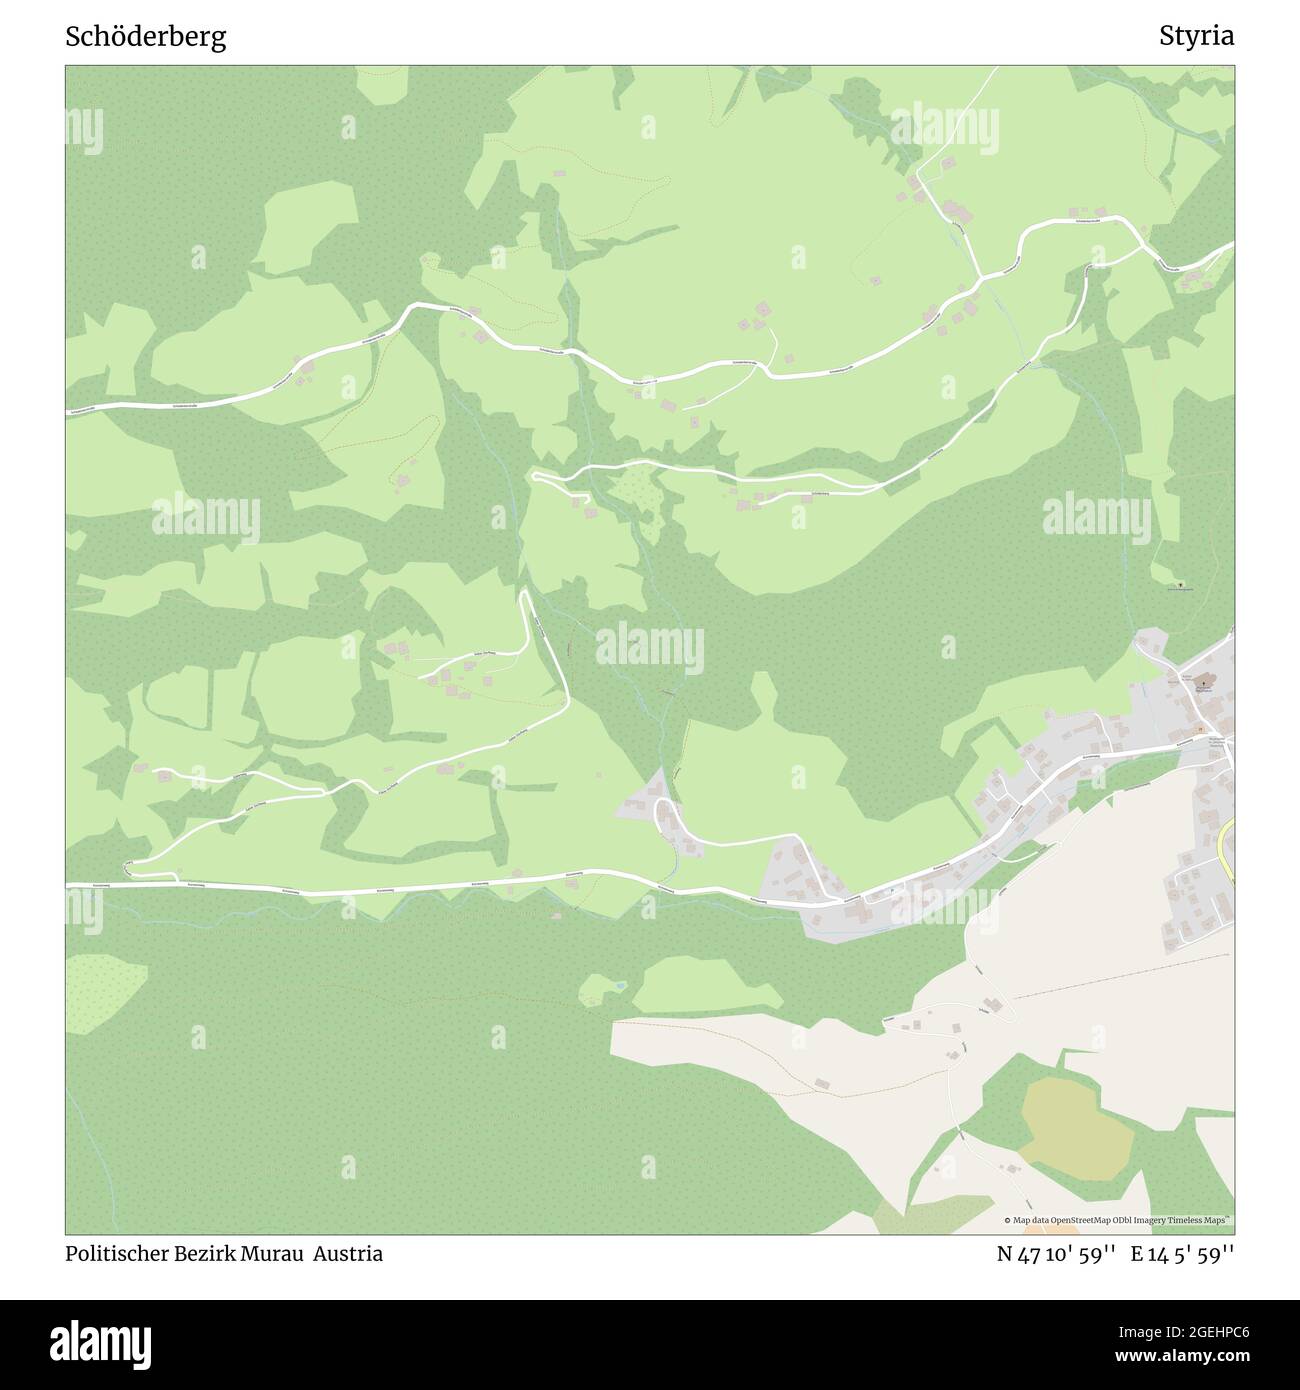 Schöderberg, Politischer Bezirk Murau, Austria, Styria, N 47 10' 59'', E 14 5' 59'', map, Timeless Map published in 2021. Travelers, explorers and adventurers like Florence Nightingale, David Livingstone, Ernest Shackleton, Lewis and Clark and Sherlock Holmes relied on maps to plan travels to the world's most remote corners, Timeless Maps is mapping most locations on the globe, showing the achievement of great dreams Stock Photo